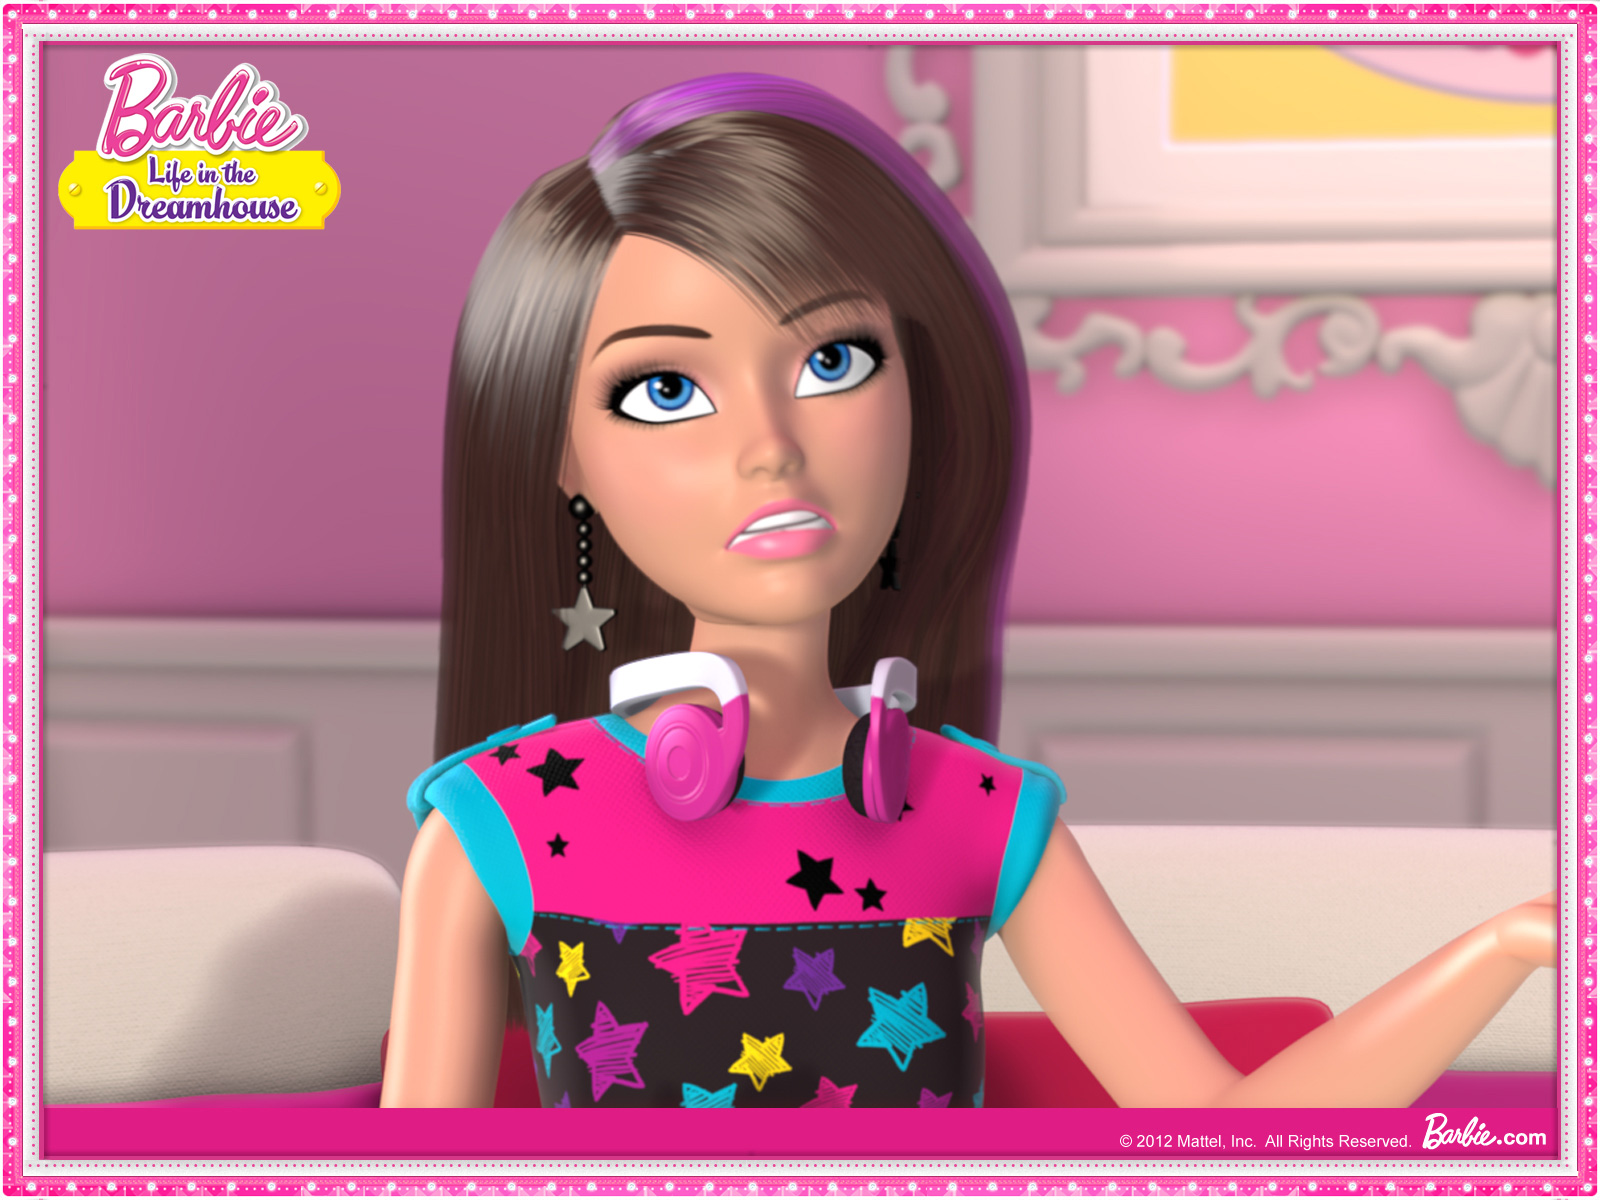 Barbie Life in the Dreamhouse - Barbie Movies Photo ...